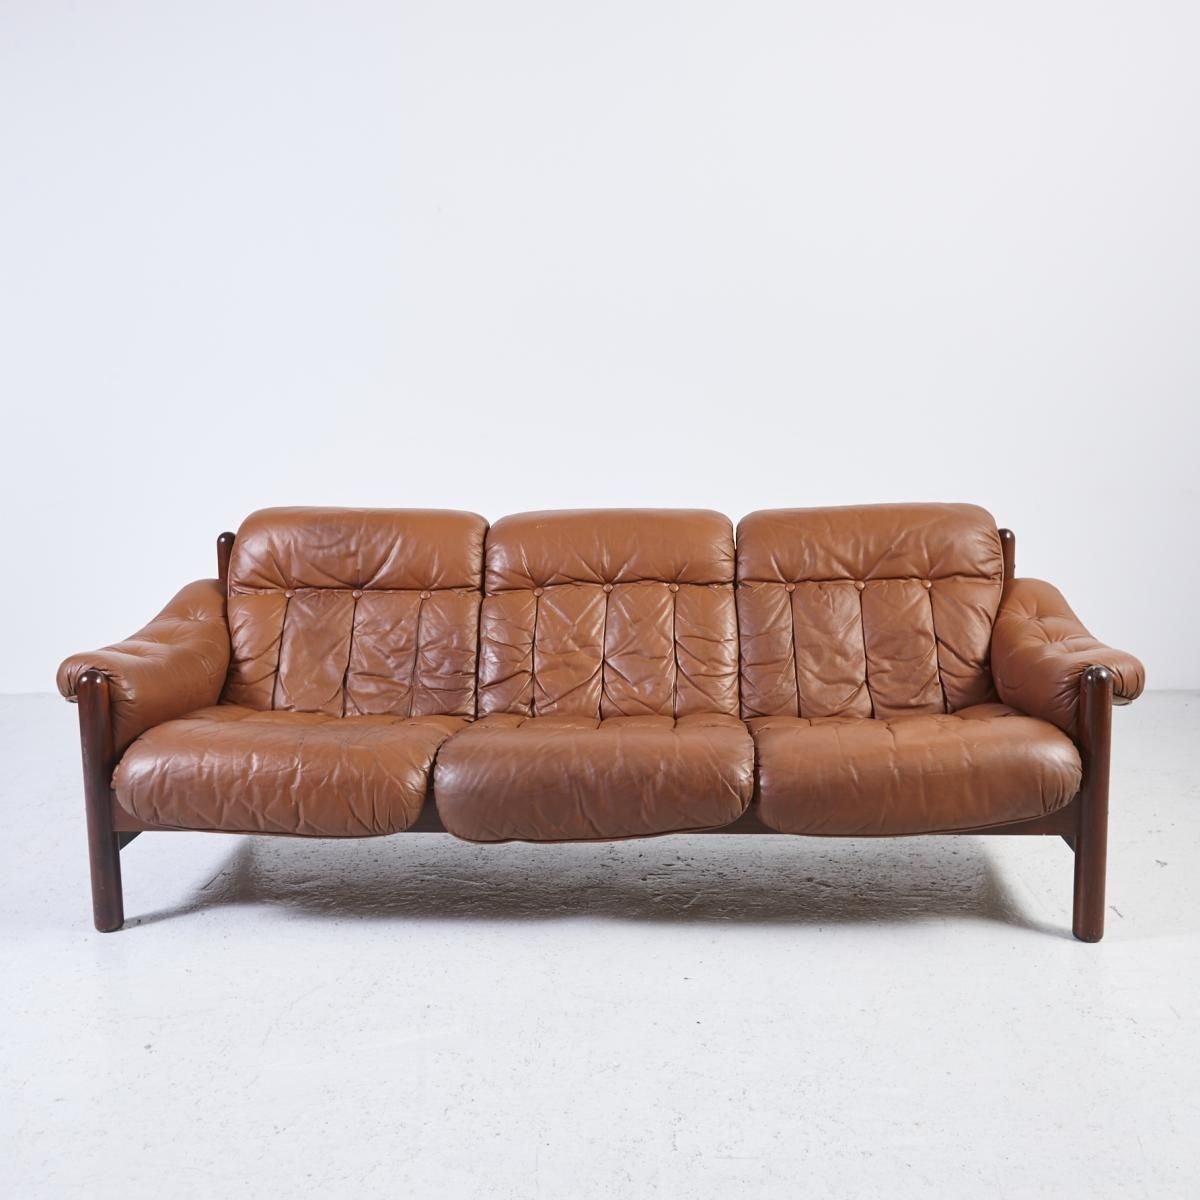 Trendy 3 Seater Leather Sofas With Vintage 3 Seater Leather Sofa With Teak Frame For Sale At Pamono (View 1 of 15)